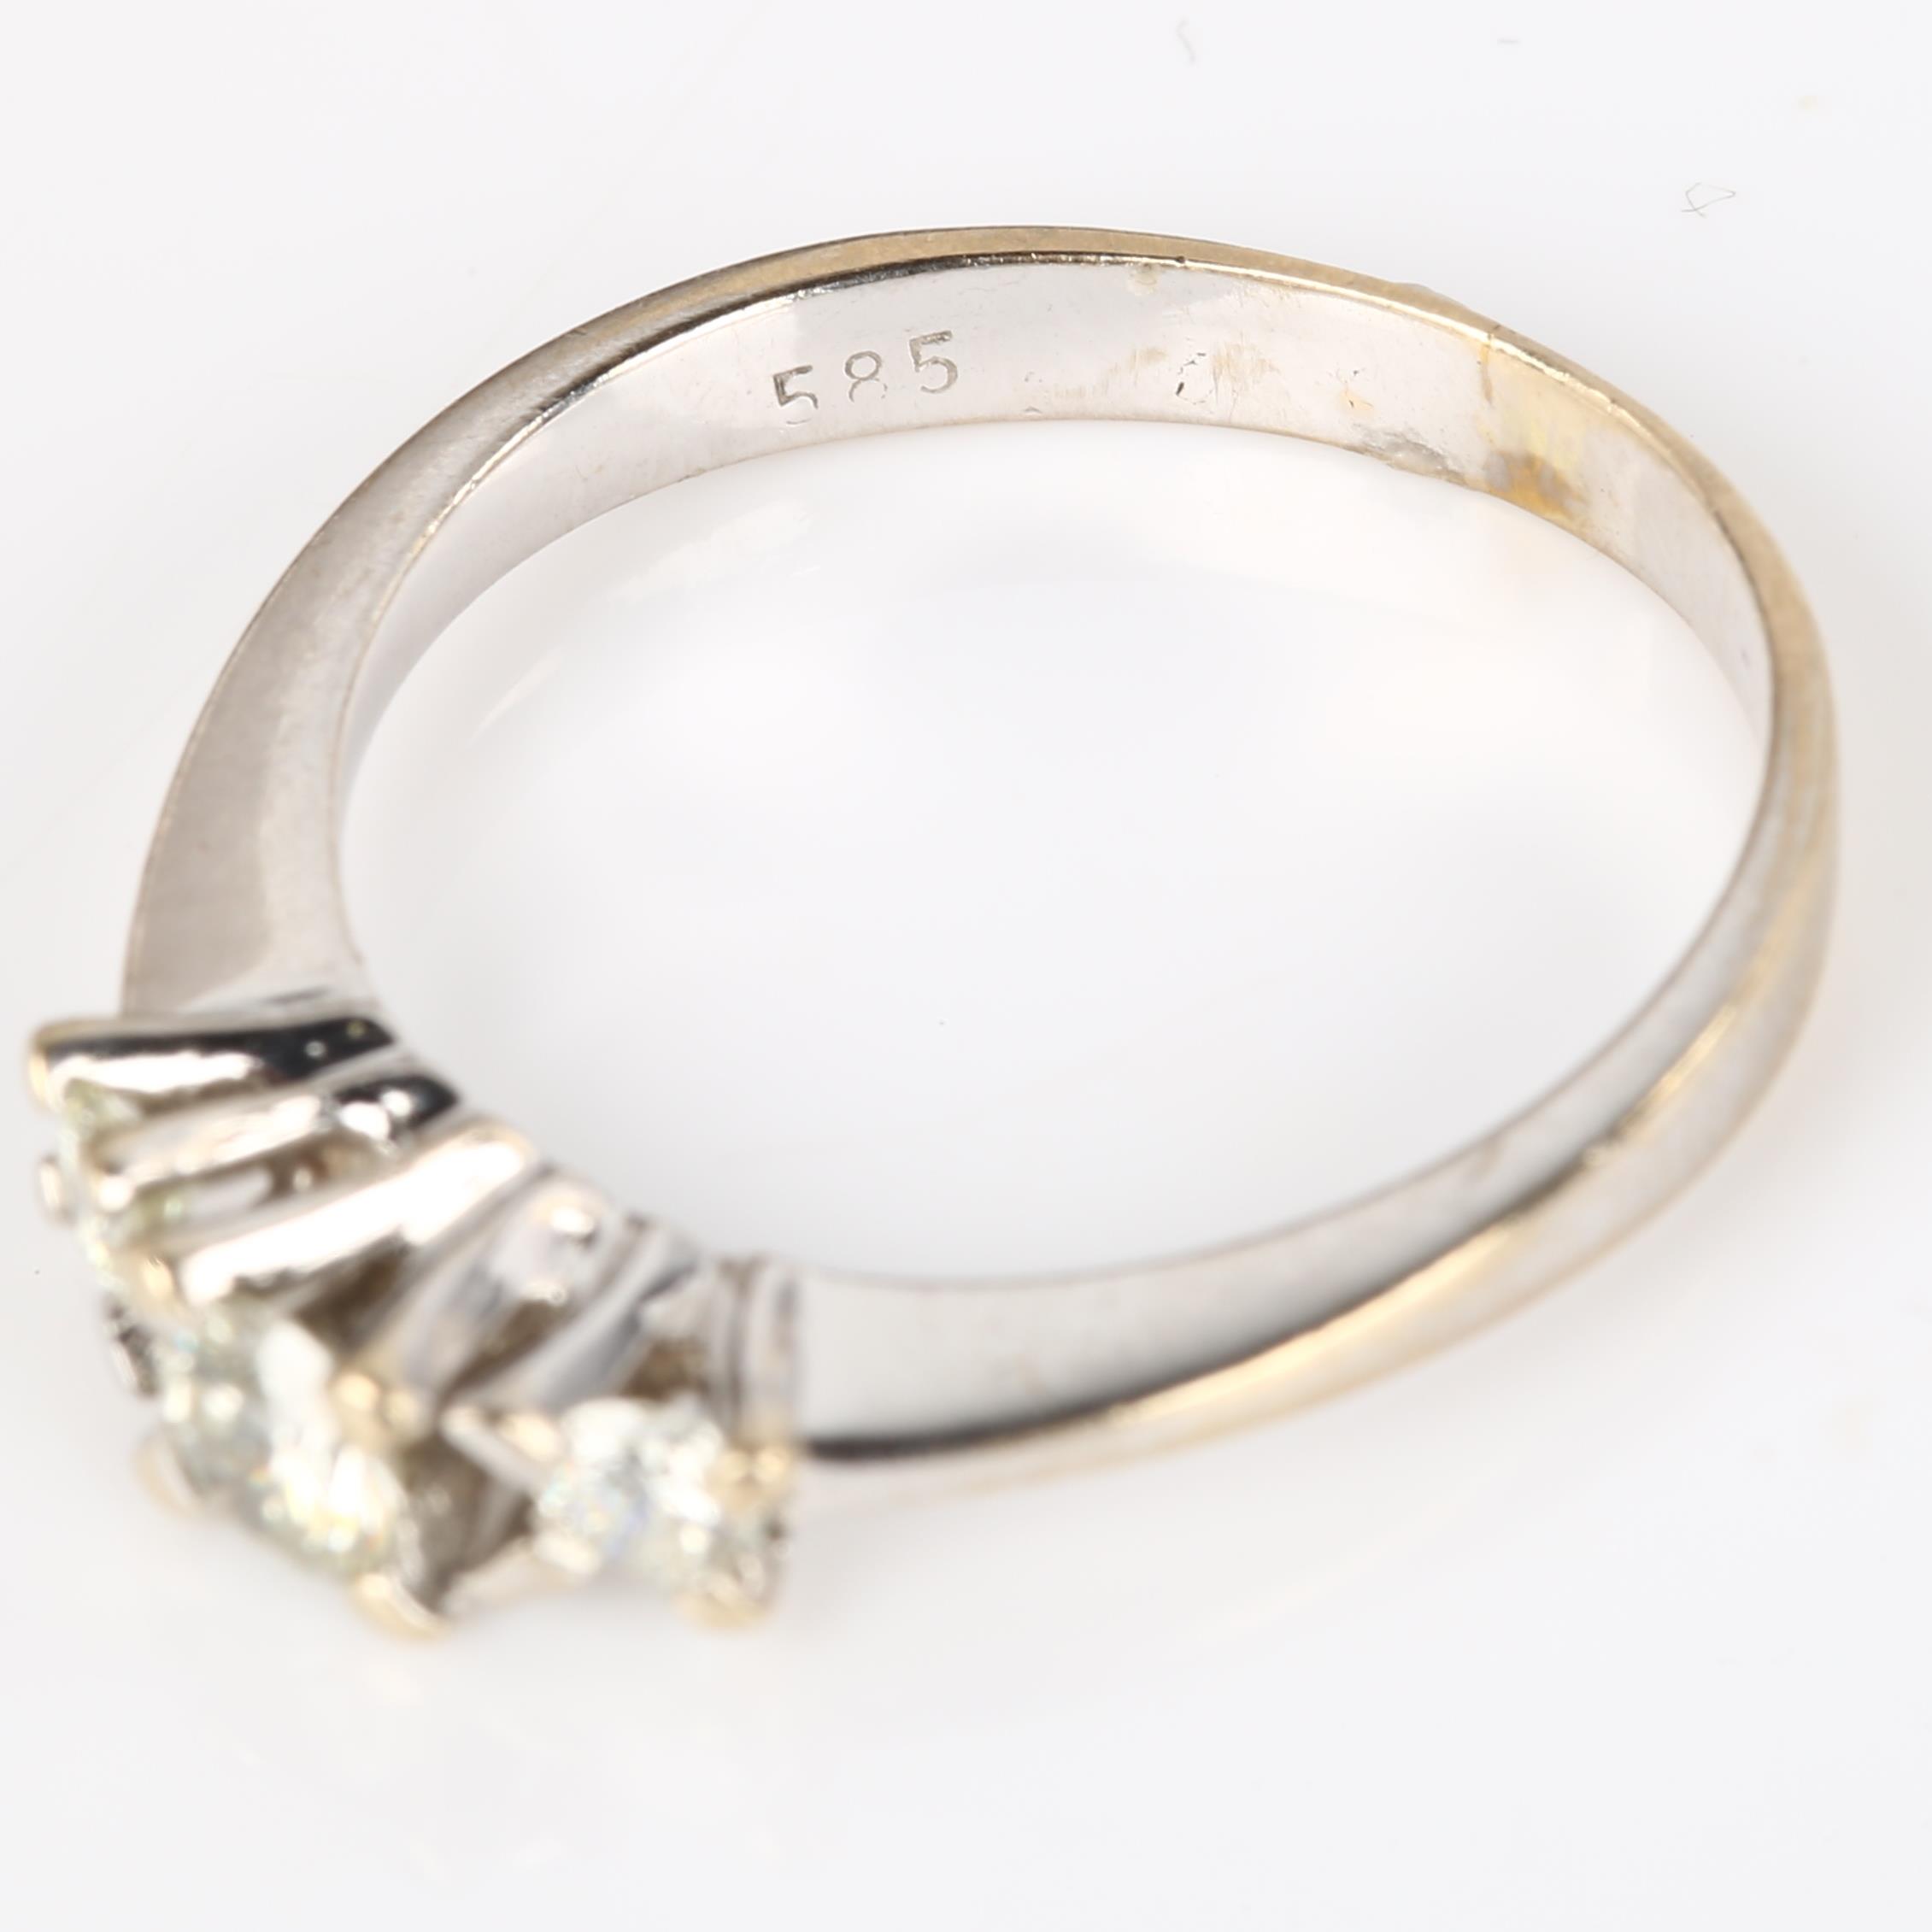 A Continental 14ct white gold three stone diamond ring, set with modern round brilliant-cut - Image 3 of 4